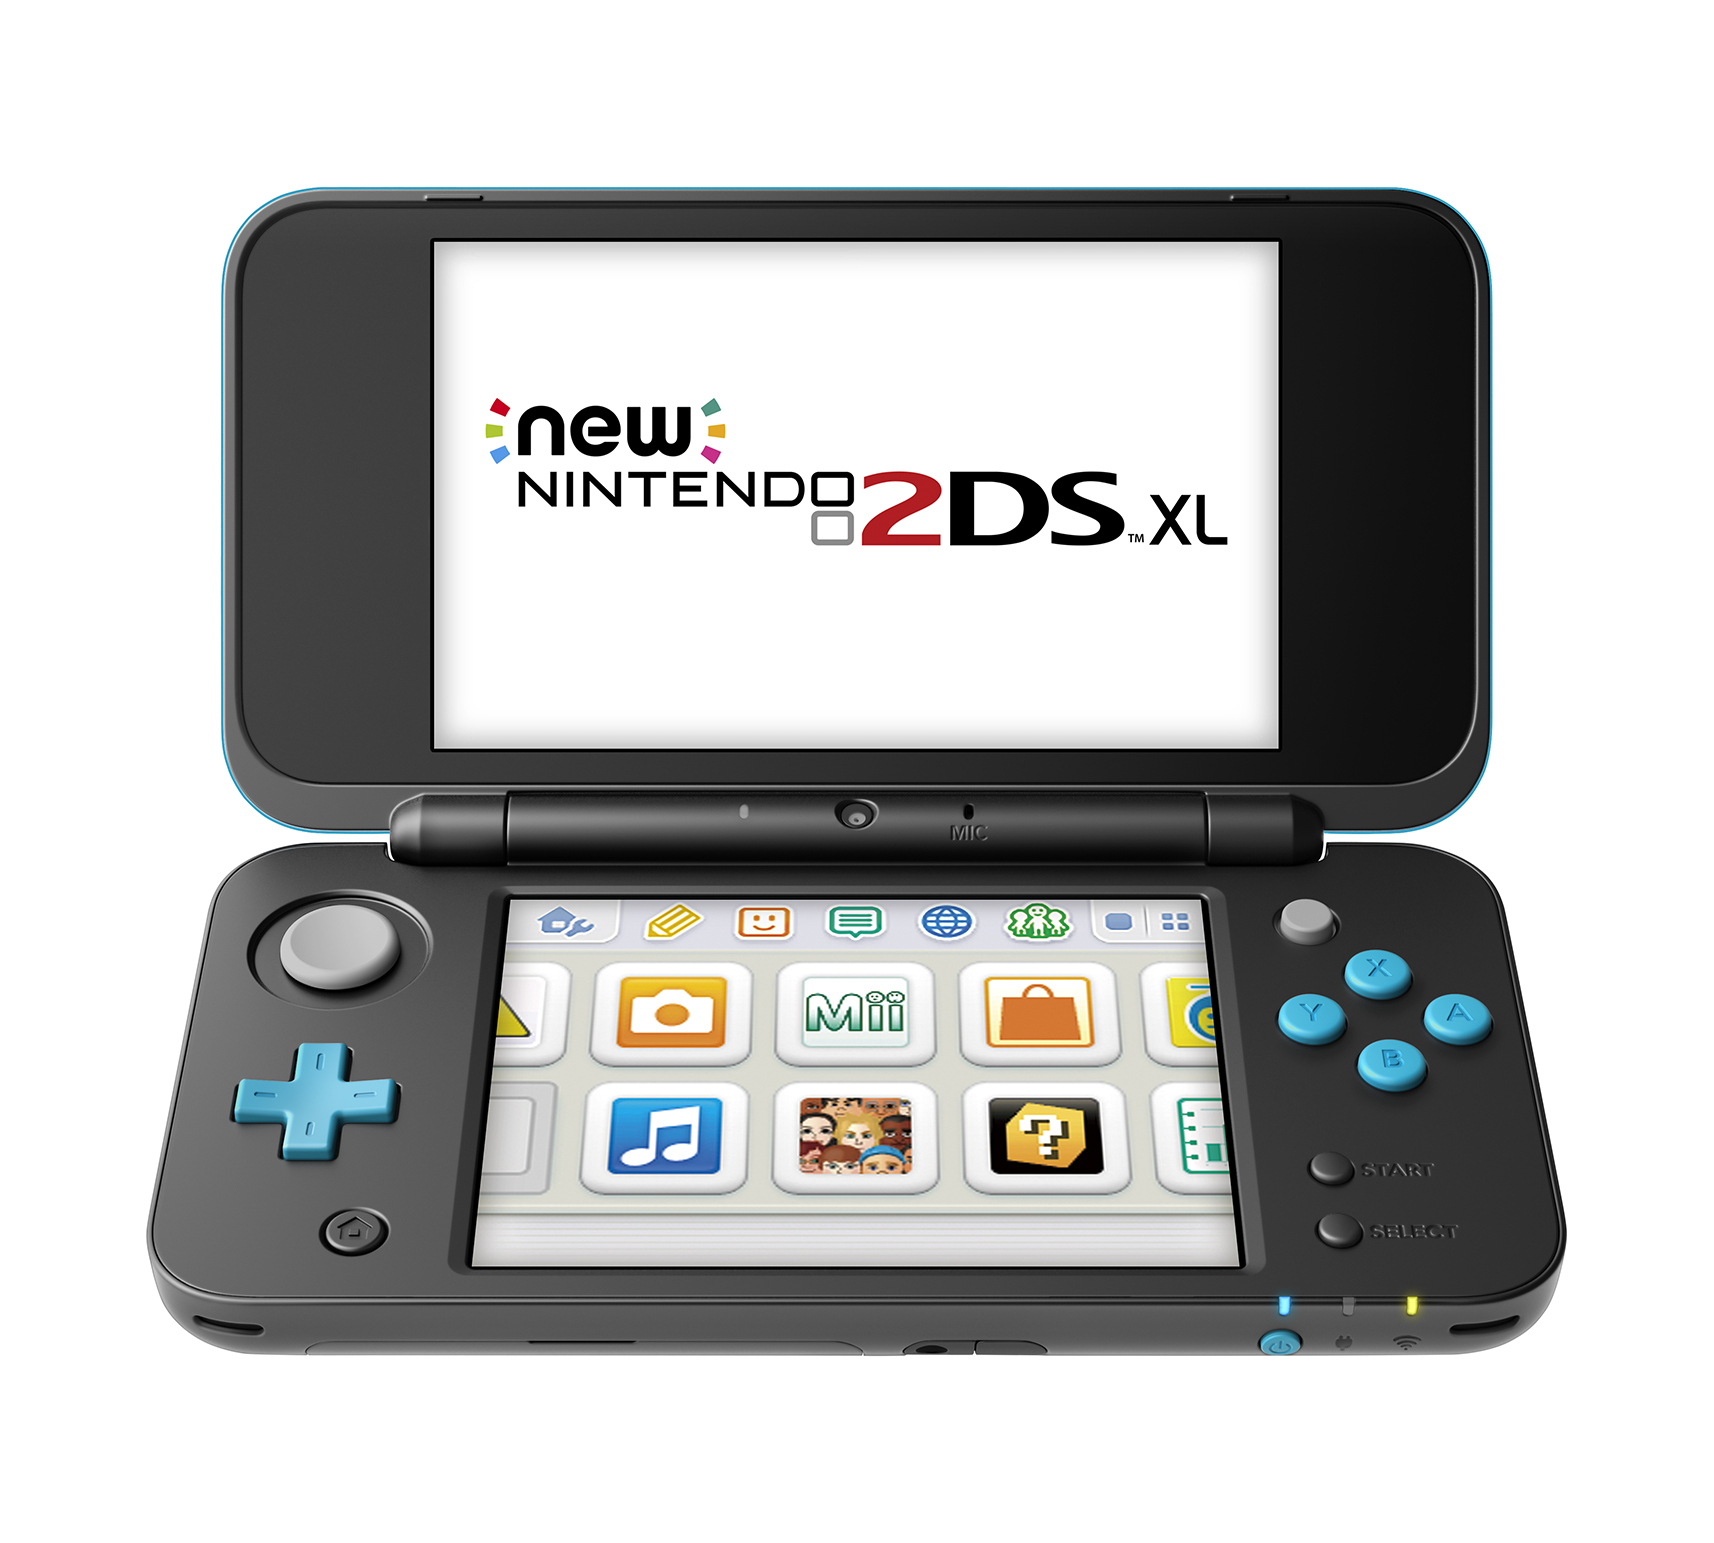 New Nintendo 2DS XL System w/ Mario Kart 7 Pre-installed, Black & Turquoise - image 1 of 6